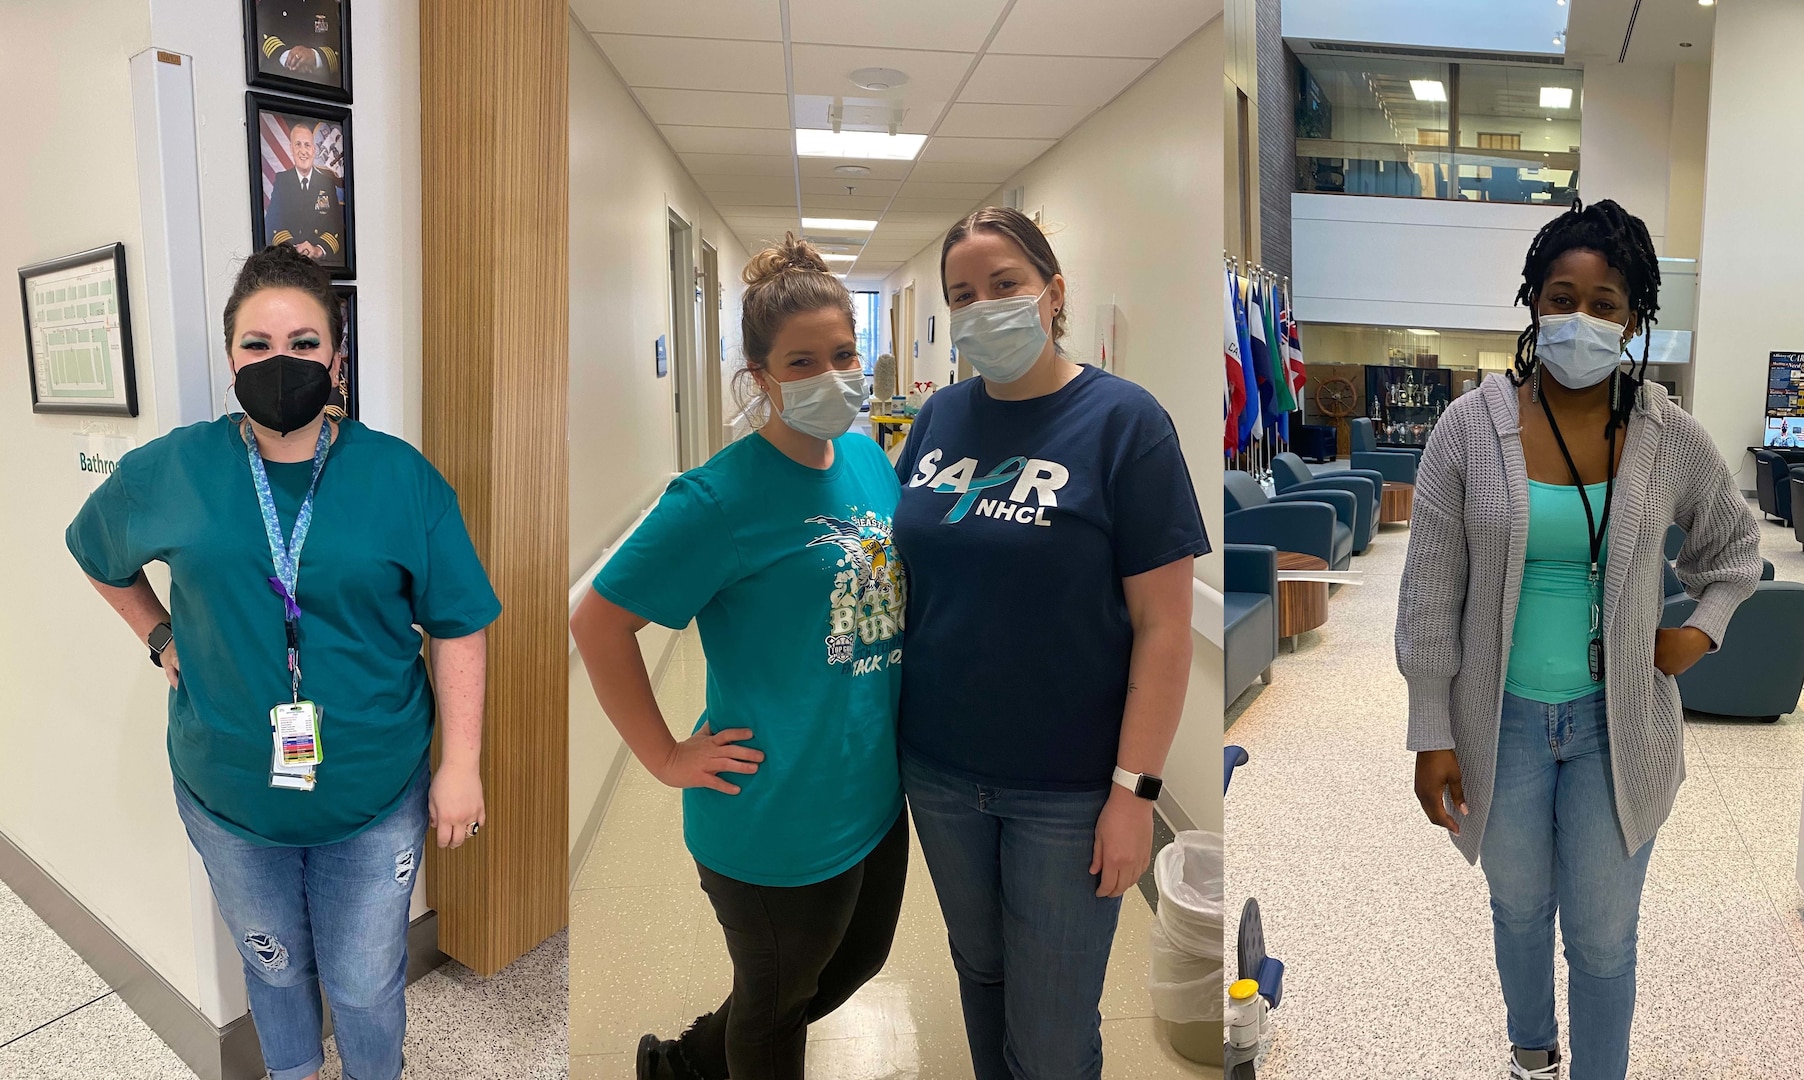 Throughout the month of April, Naval Medical Center Camp Lejeune employees wear teal and denim to help raise awareness and show support for victims of sexual assault.